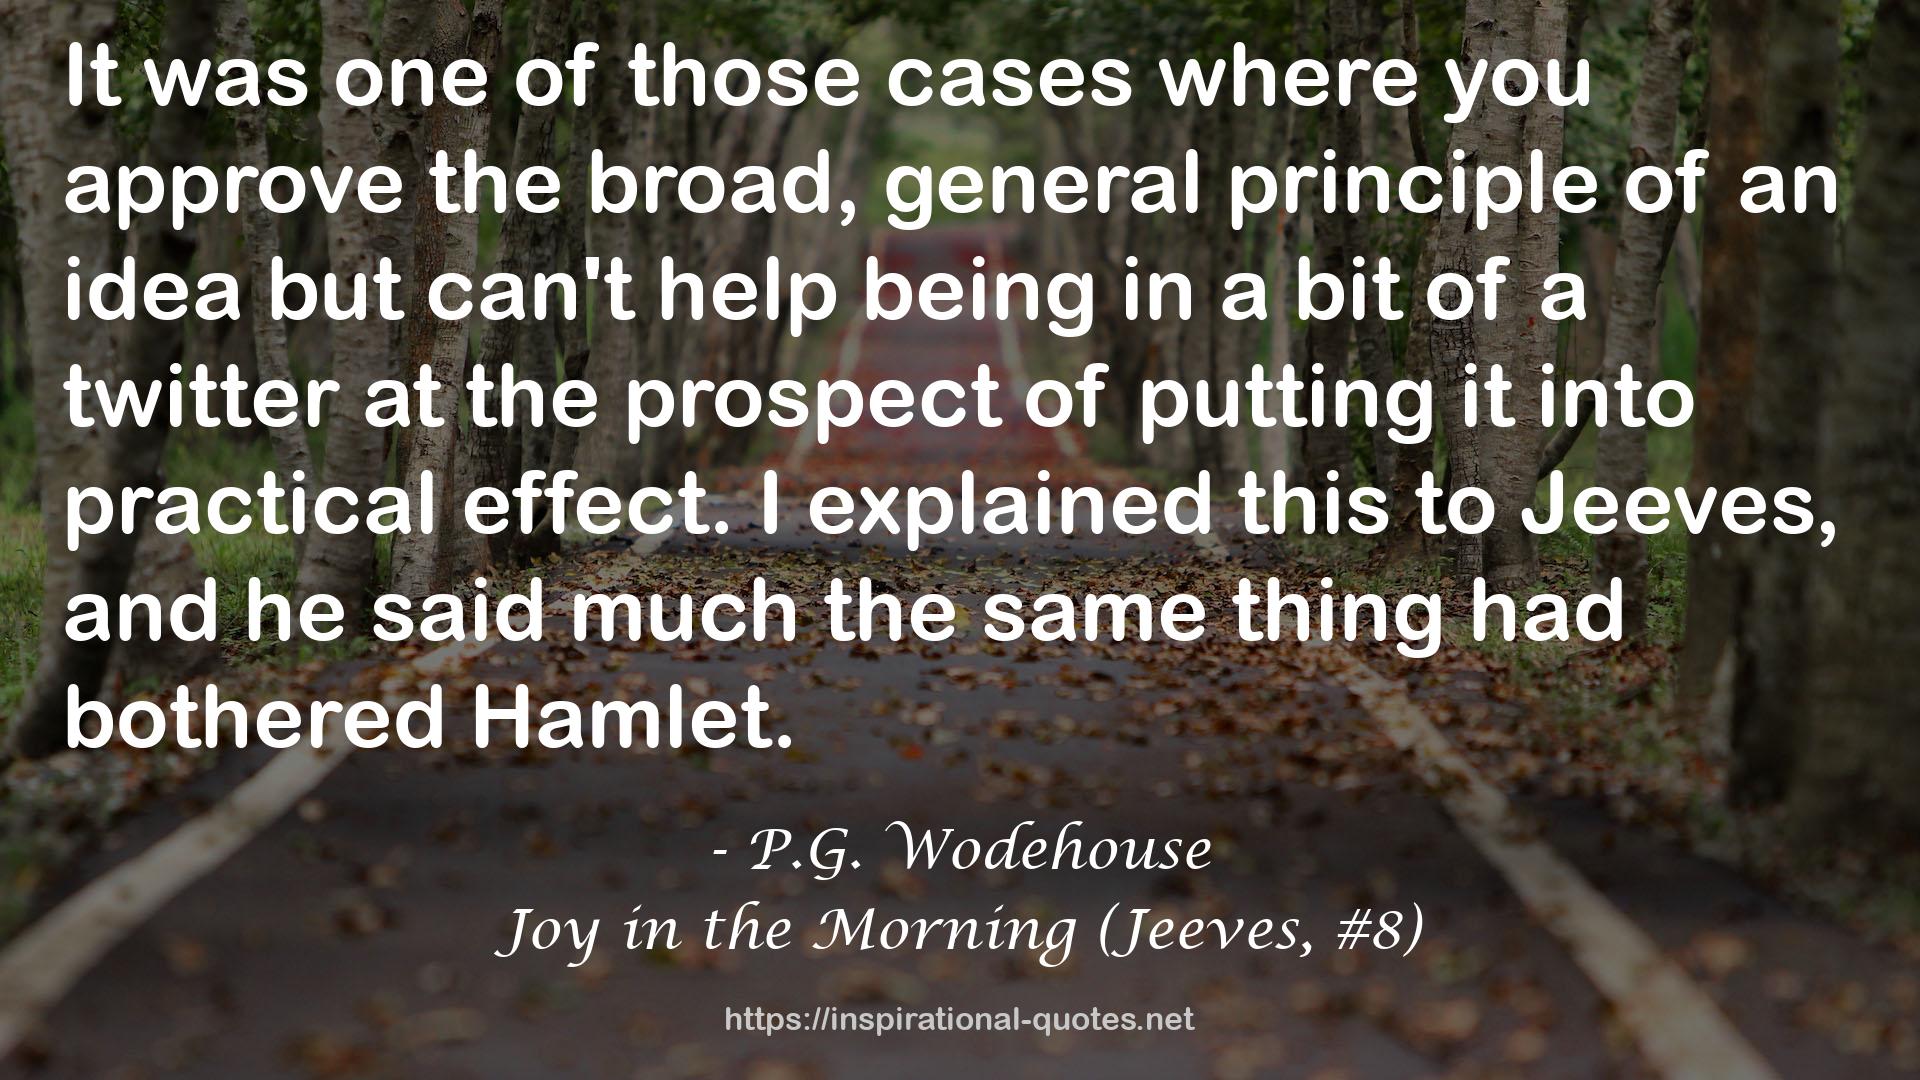 Joy in the Morning (Jeeves, #8) QUOTES